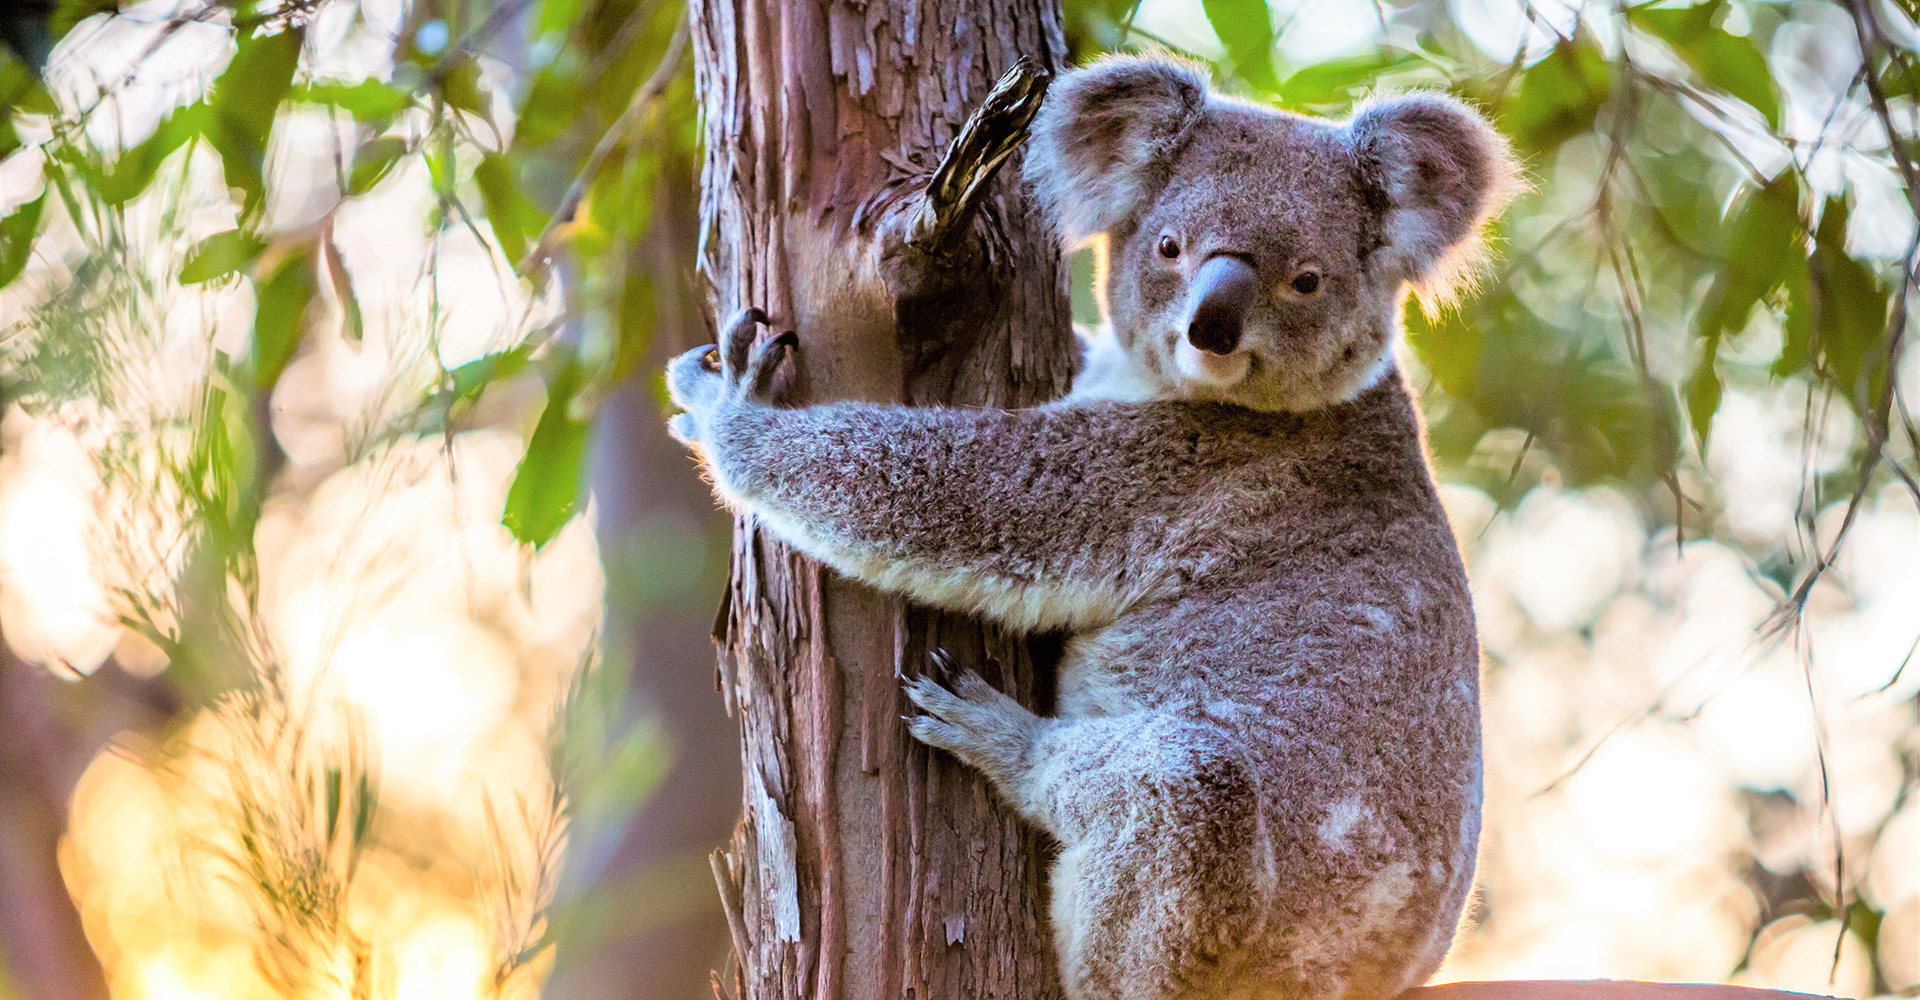 We have high populations of Koalas in the Amamoor area